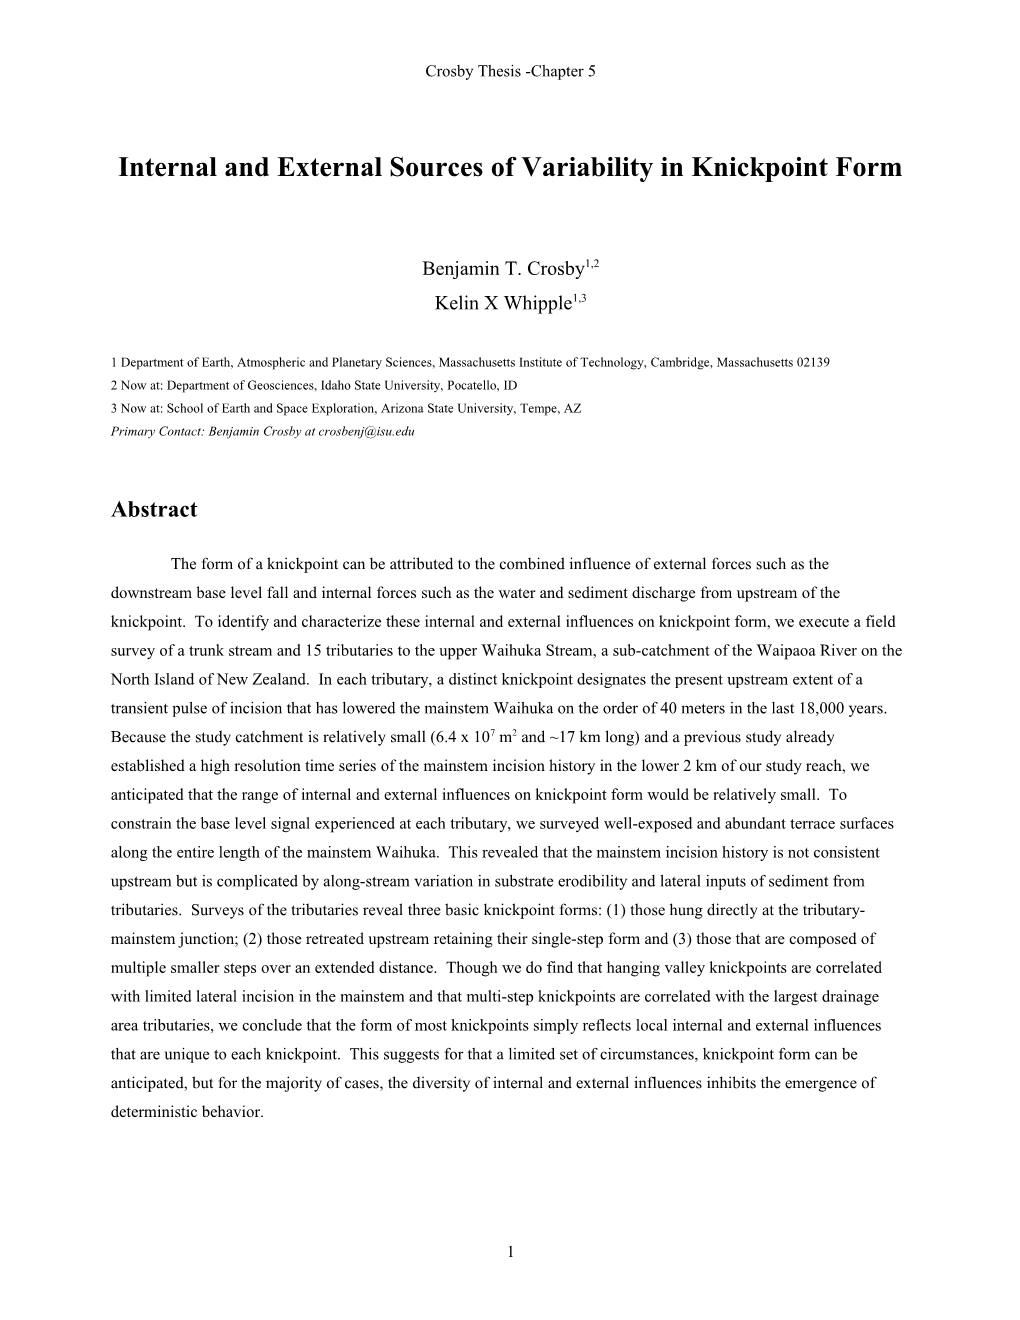 Internal and External Sources of Variability in Knickpoint Form